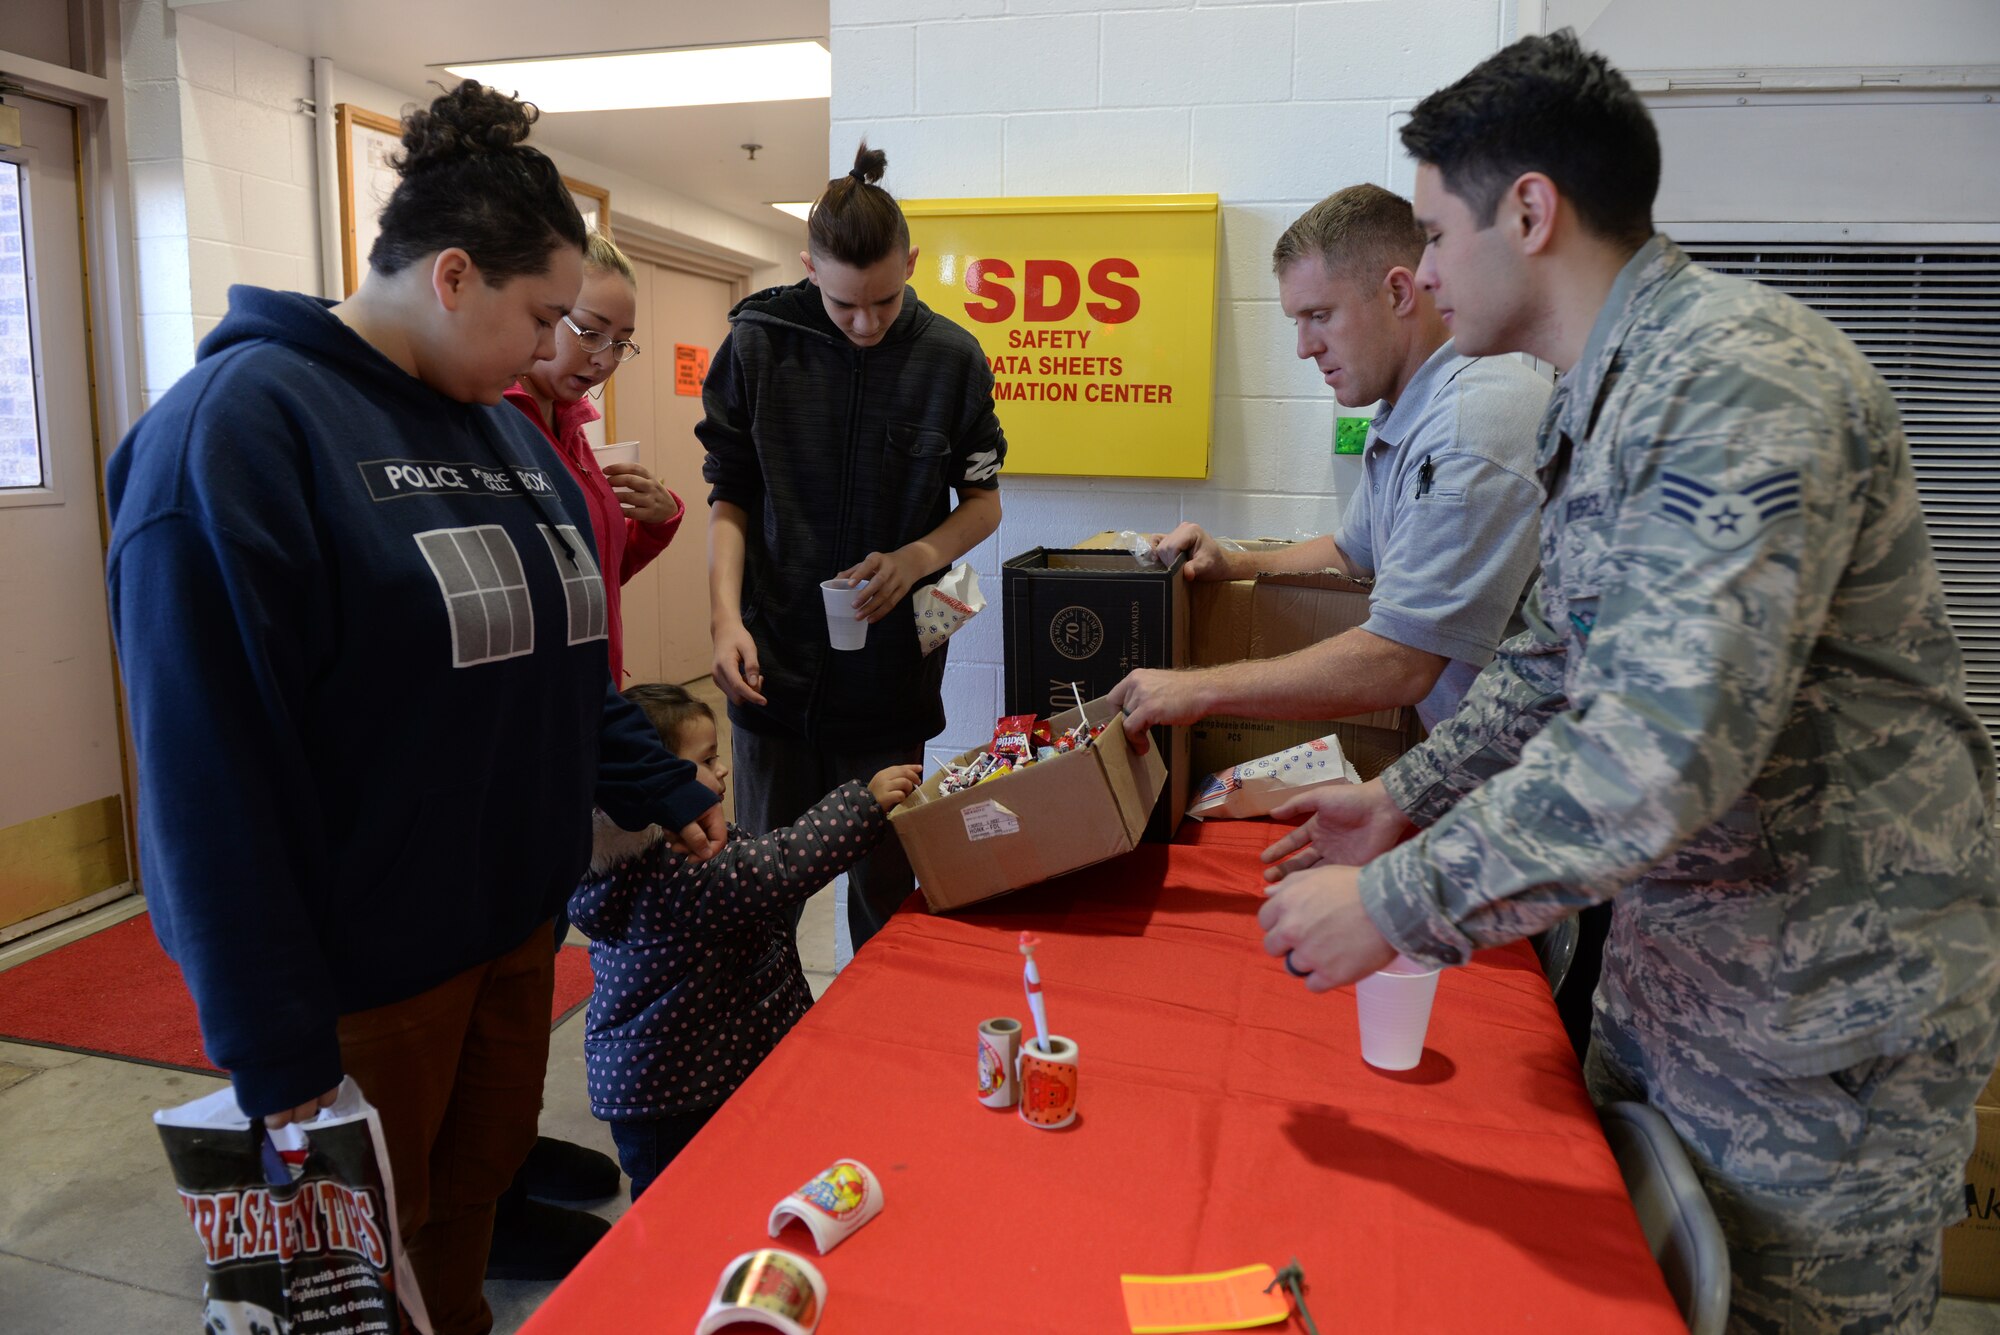 Airmen give out candy to children during the Fire Prevention Week Open House event at the 28th Civil Engineer Squadron Fire Department at Ellsworth Air Force Base, S.D., Oct. 5, 2019.  Fire Prevention Week is observed each year during the week of Oct. 9, which commemorates the “Great Chicago Fire” from 1871, and is a time in which fire departments worldwide remind communities to take the appropriate measures and precautions to prevent fires. (U.S. Air Force photo by Airman Quentin K. Marx)